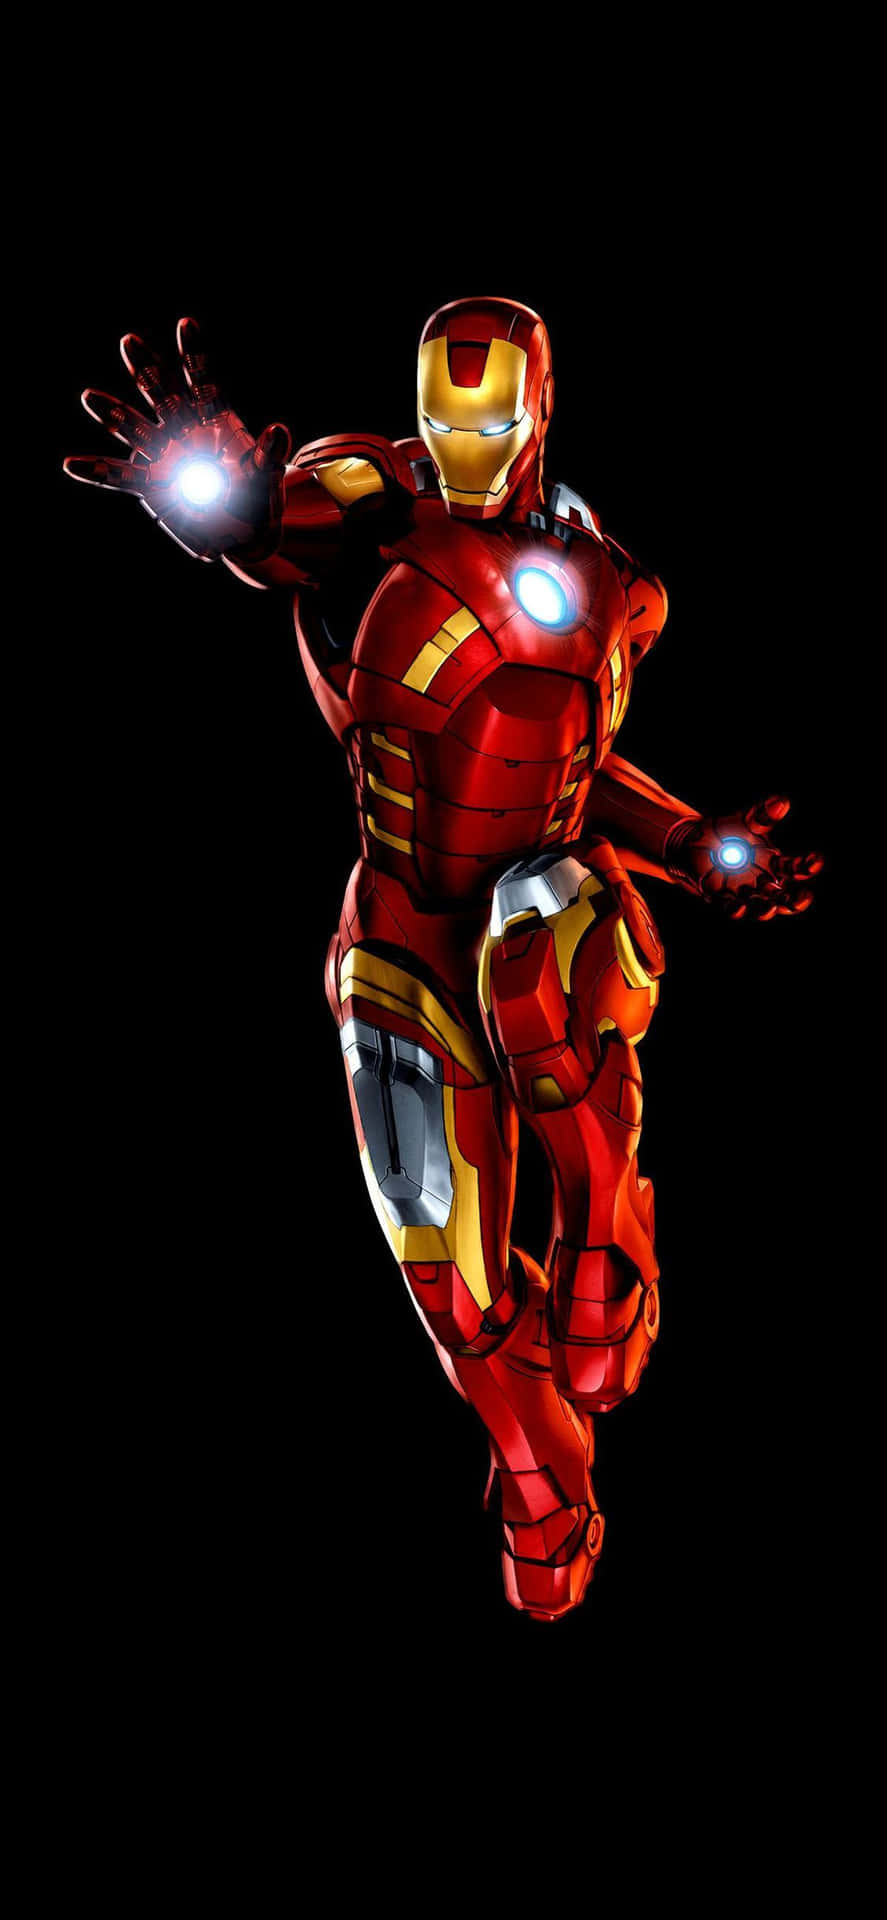 Protect your privacy with the Iron Man iPhone X Wallpaper